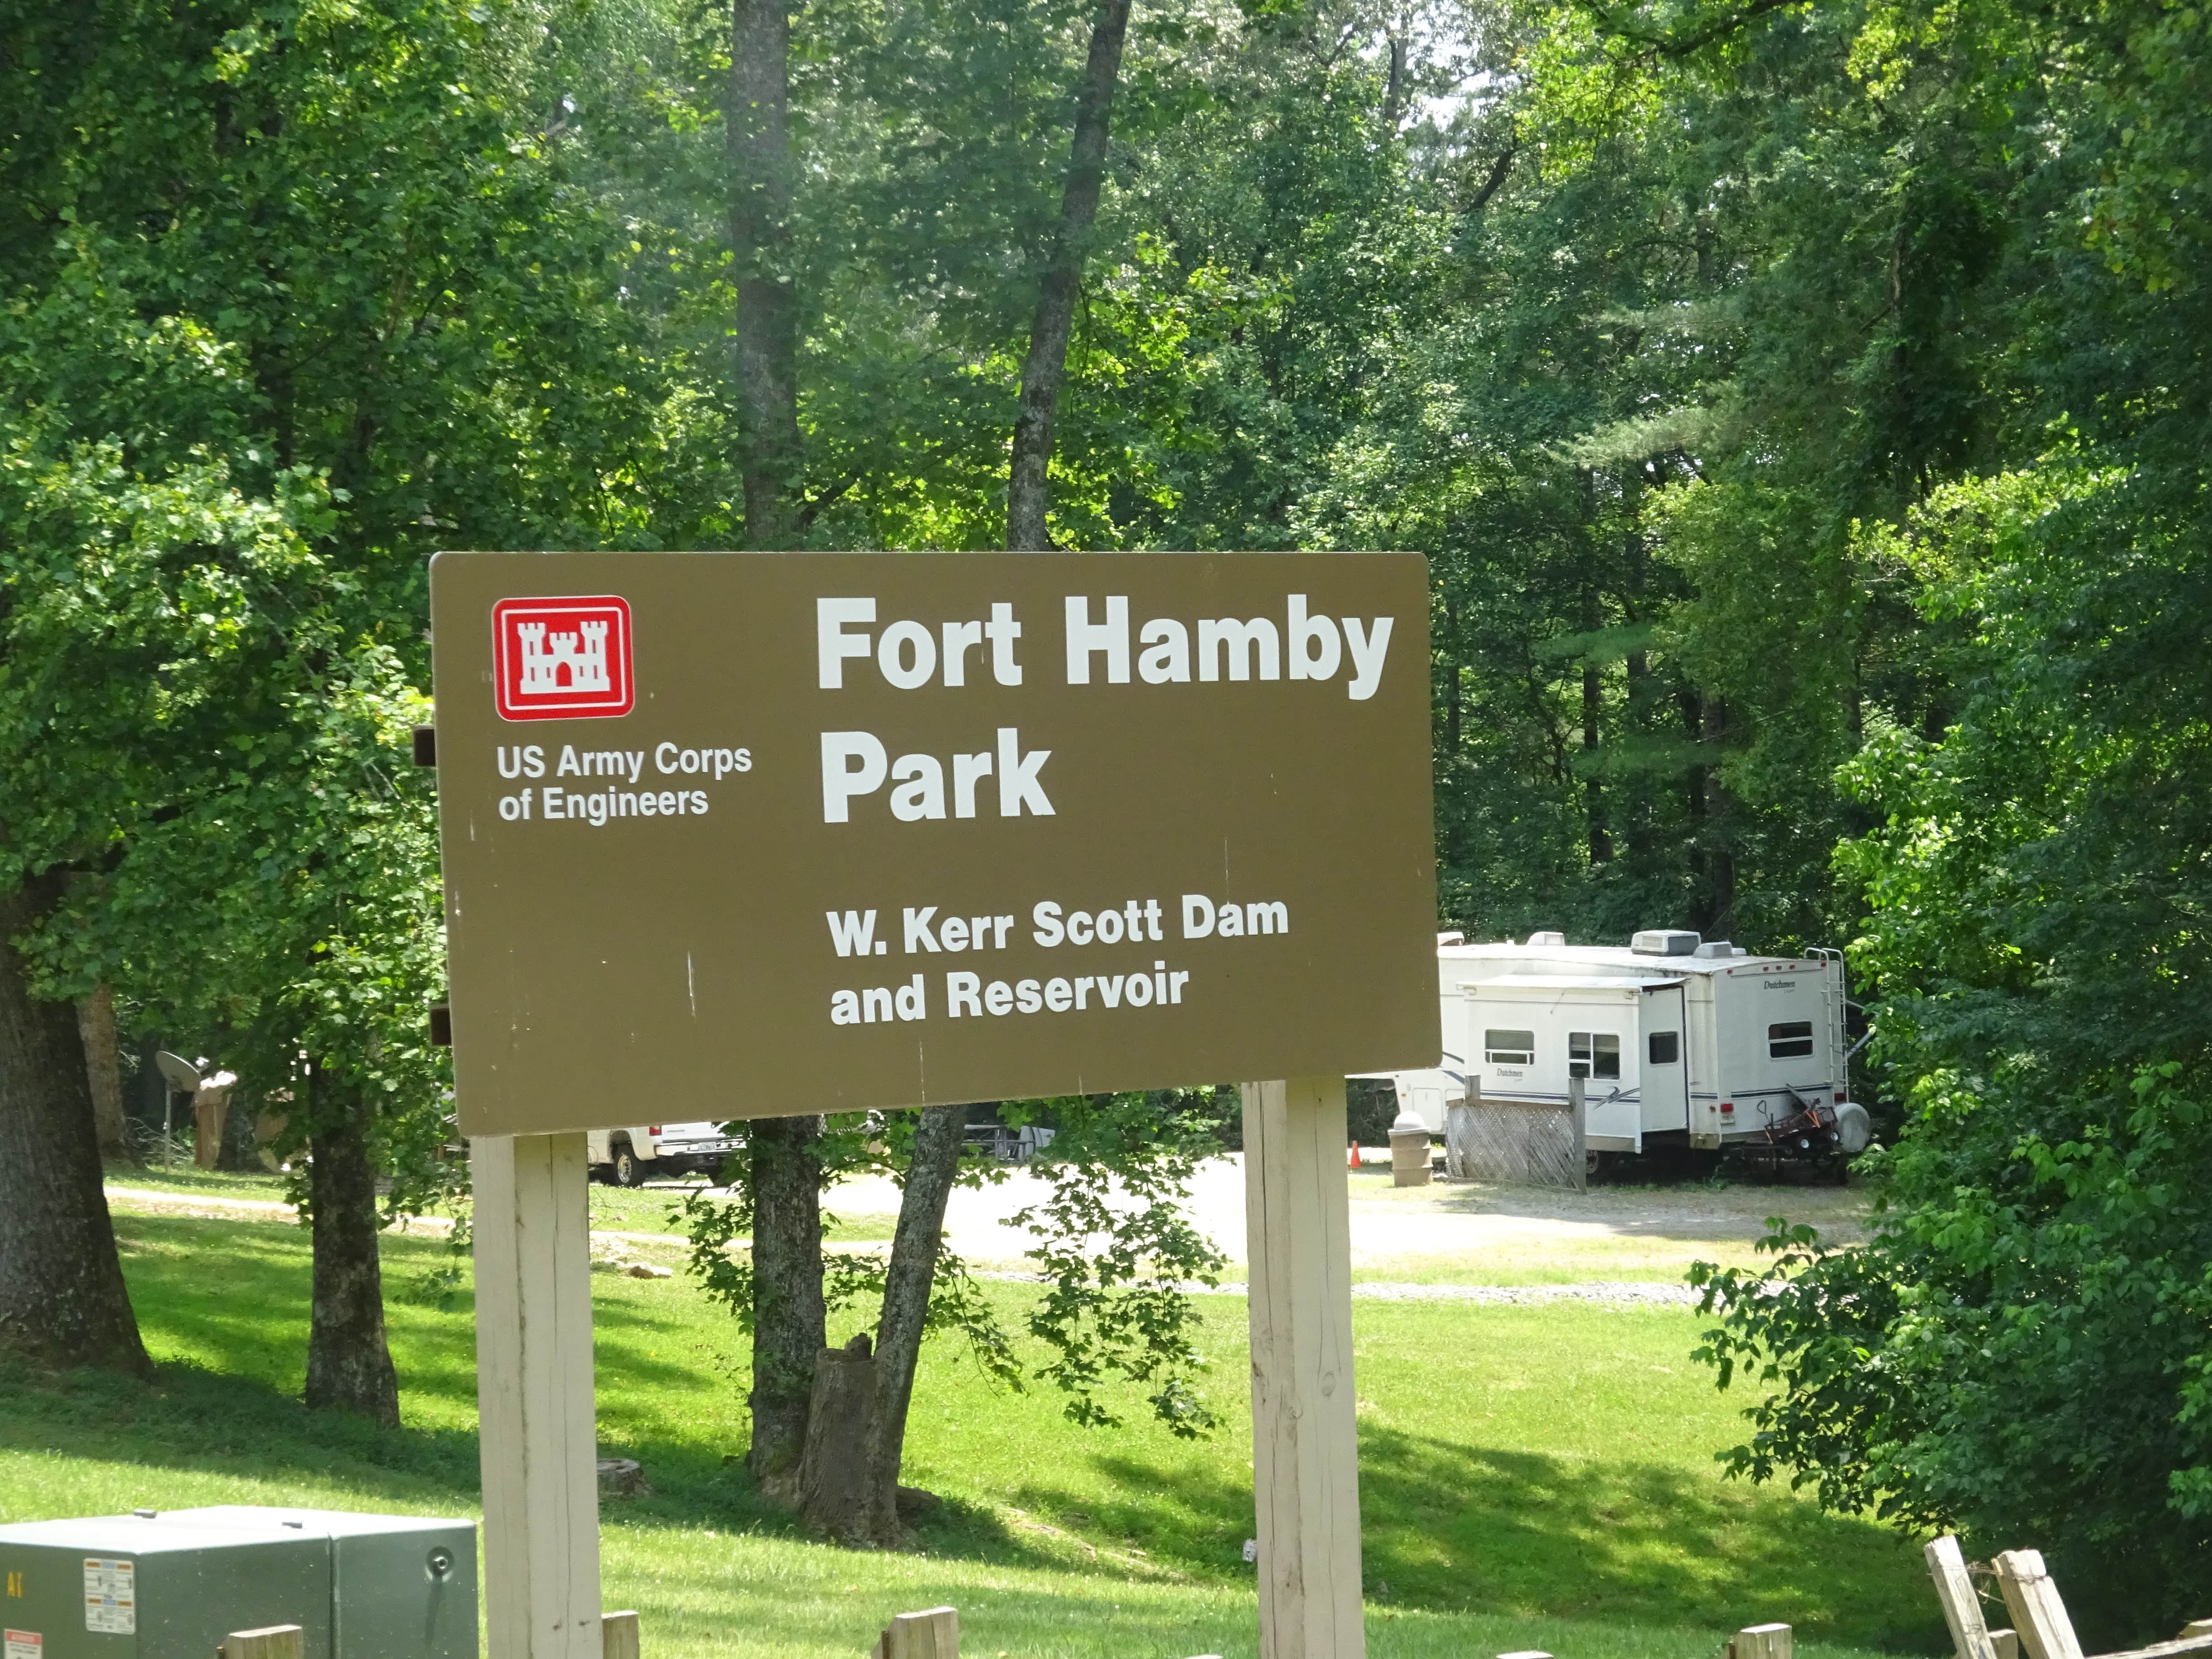 Camper submitted image from Fort Hamby Park - 1